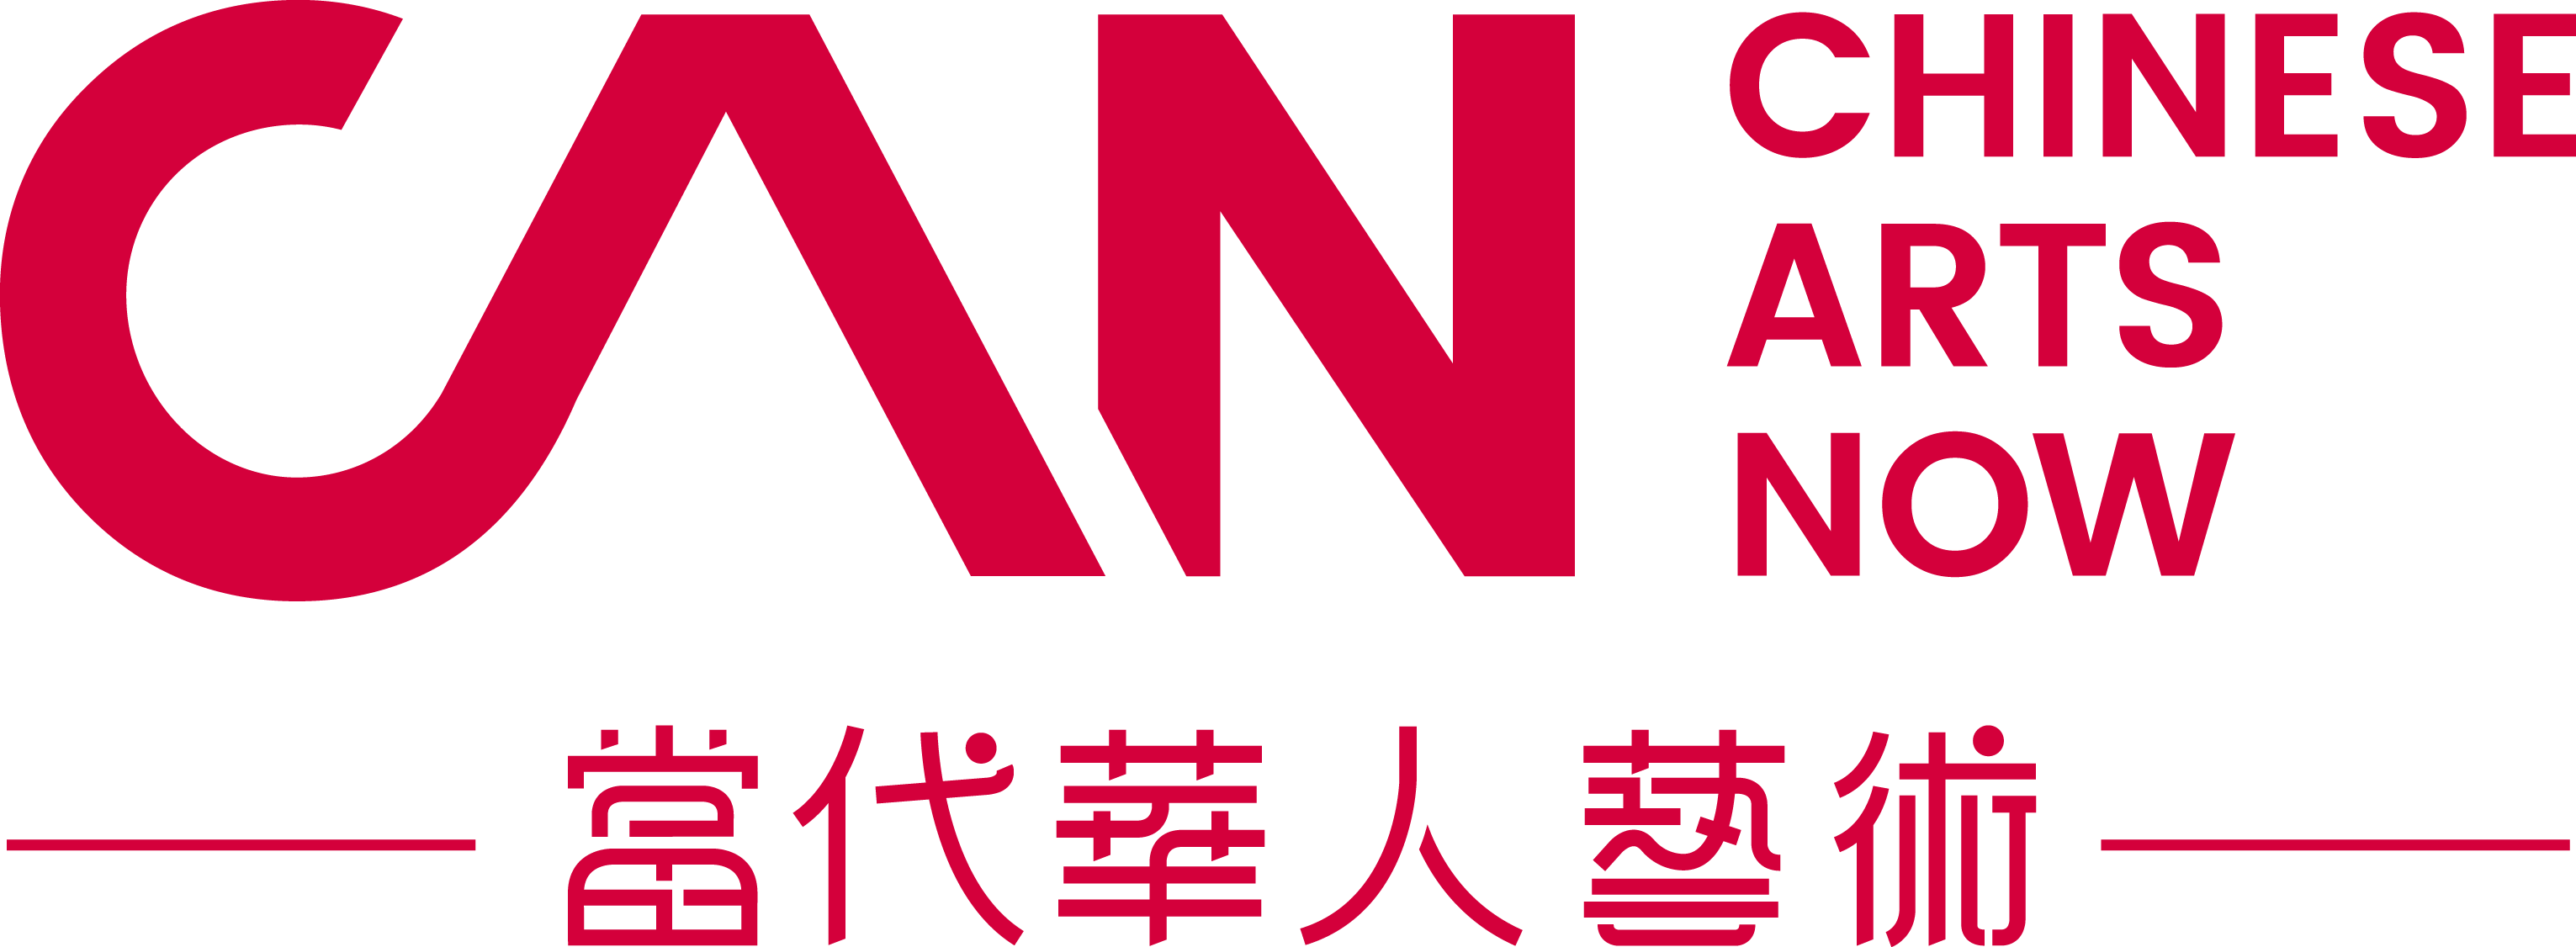 Can - Chinese Arts Now Logo (3062x1126), Png Download